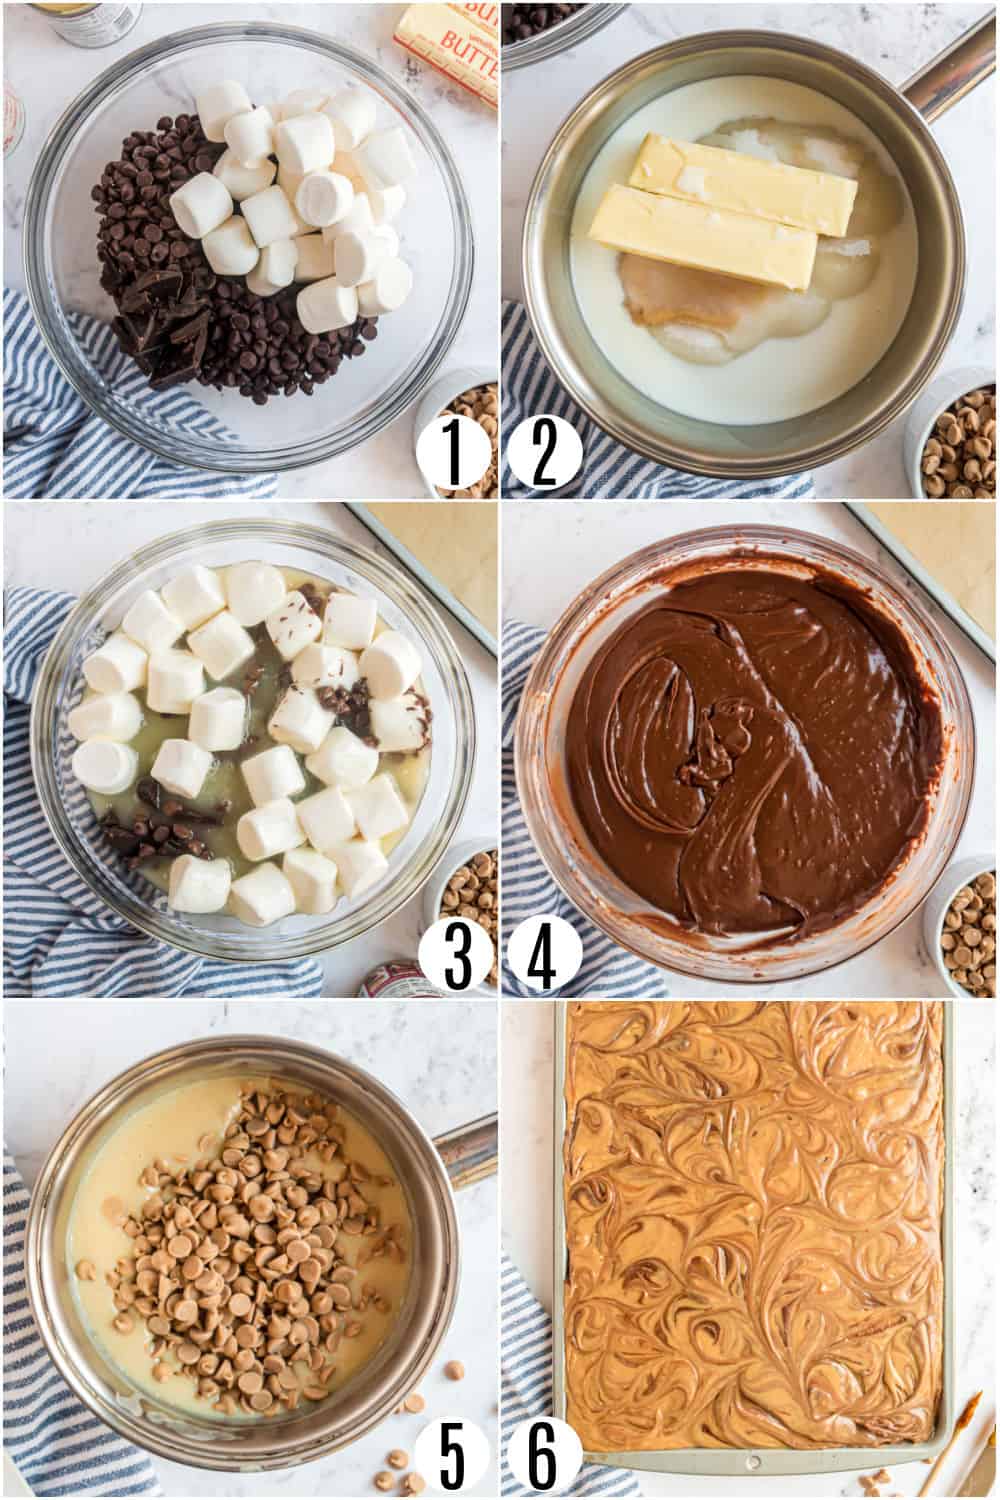 Step by step photos showing how to make chocolate peanut butter fudge.